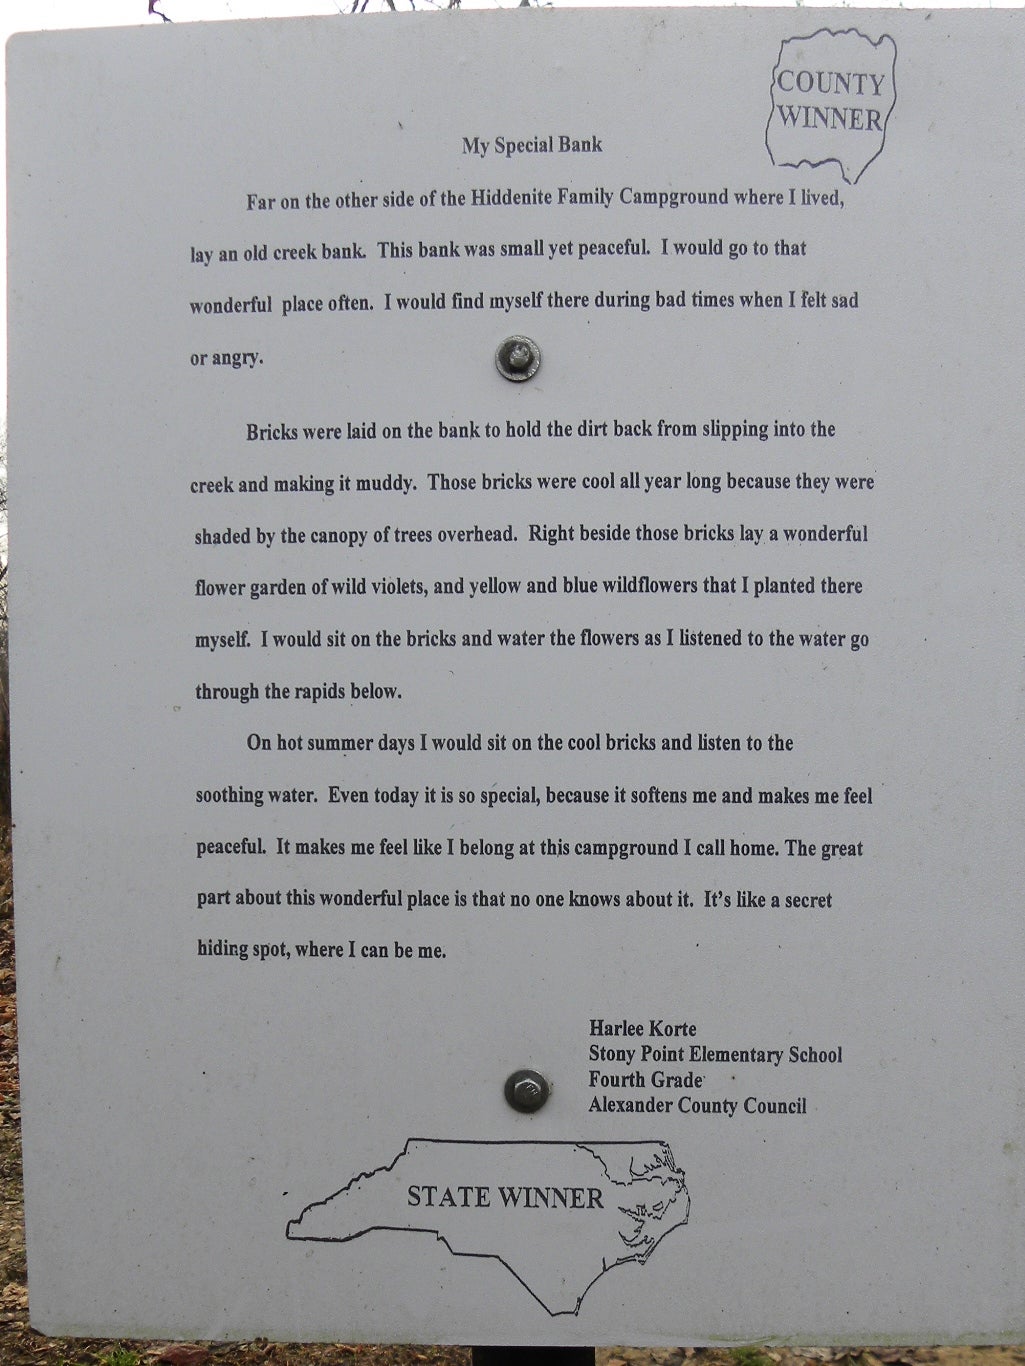 A fourth grader won an essay contest when she wrote about the campground.